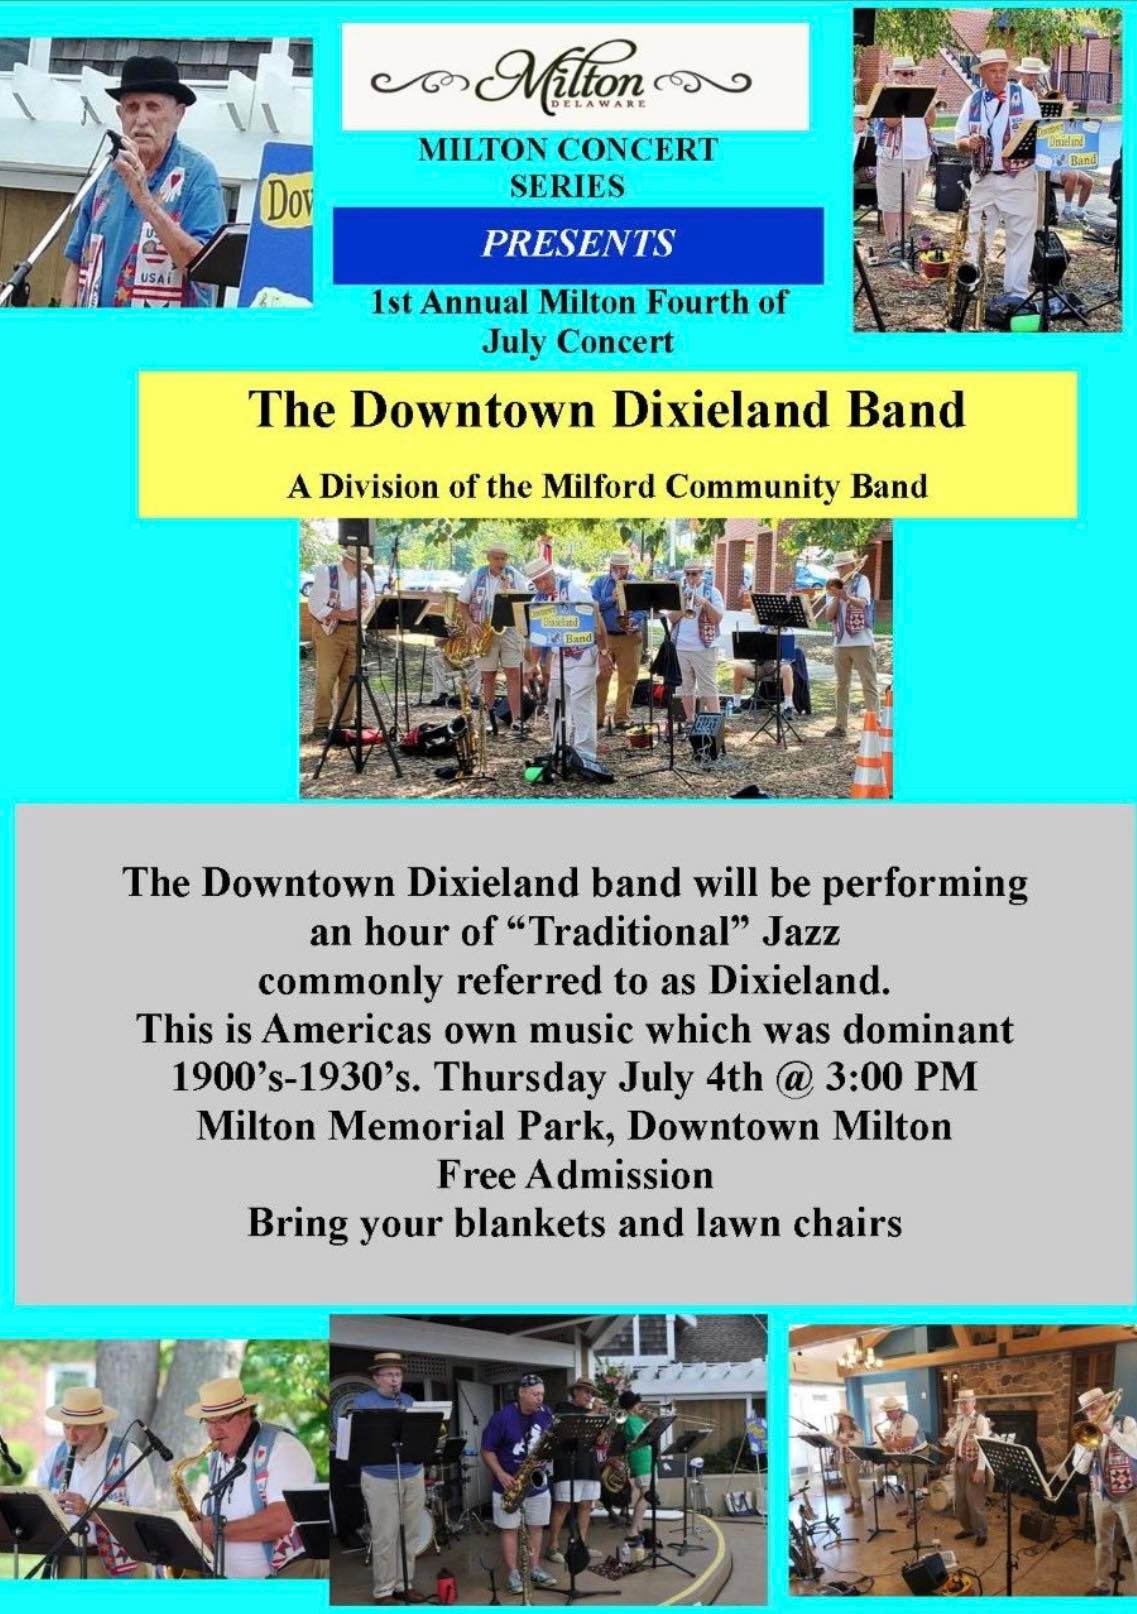 Milton Concert Series:  Concerts on the Fourth - Featuring the Downtown Dixieland Band